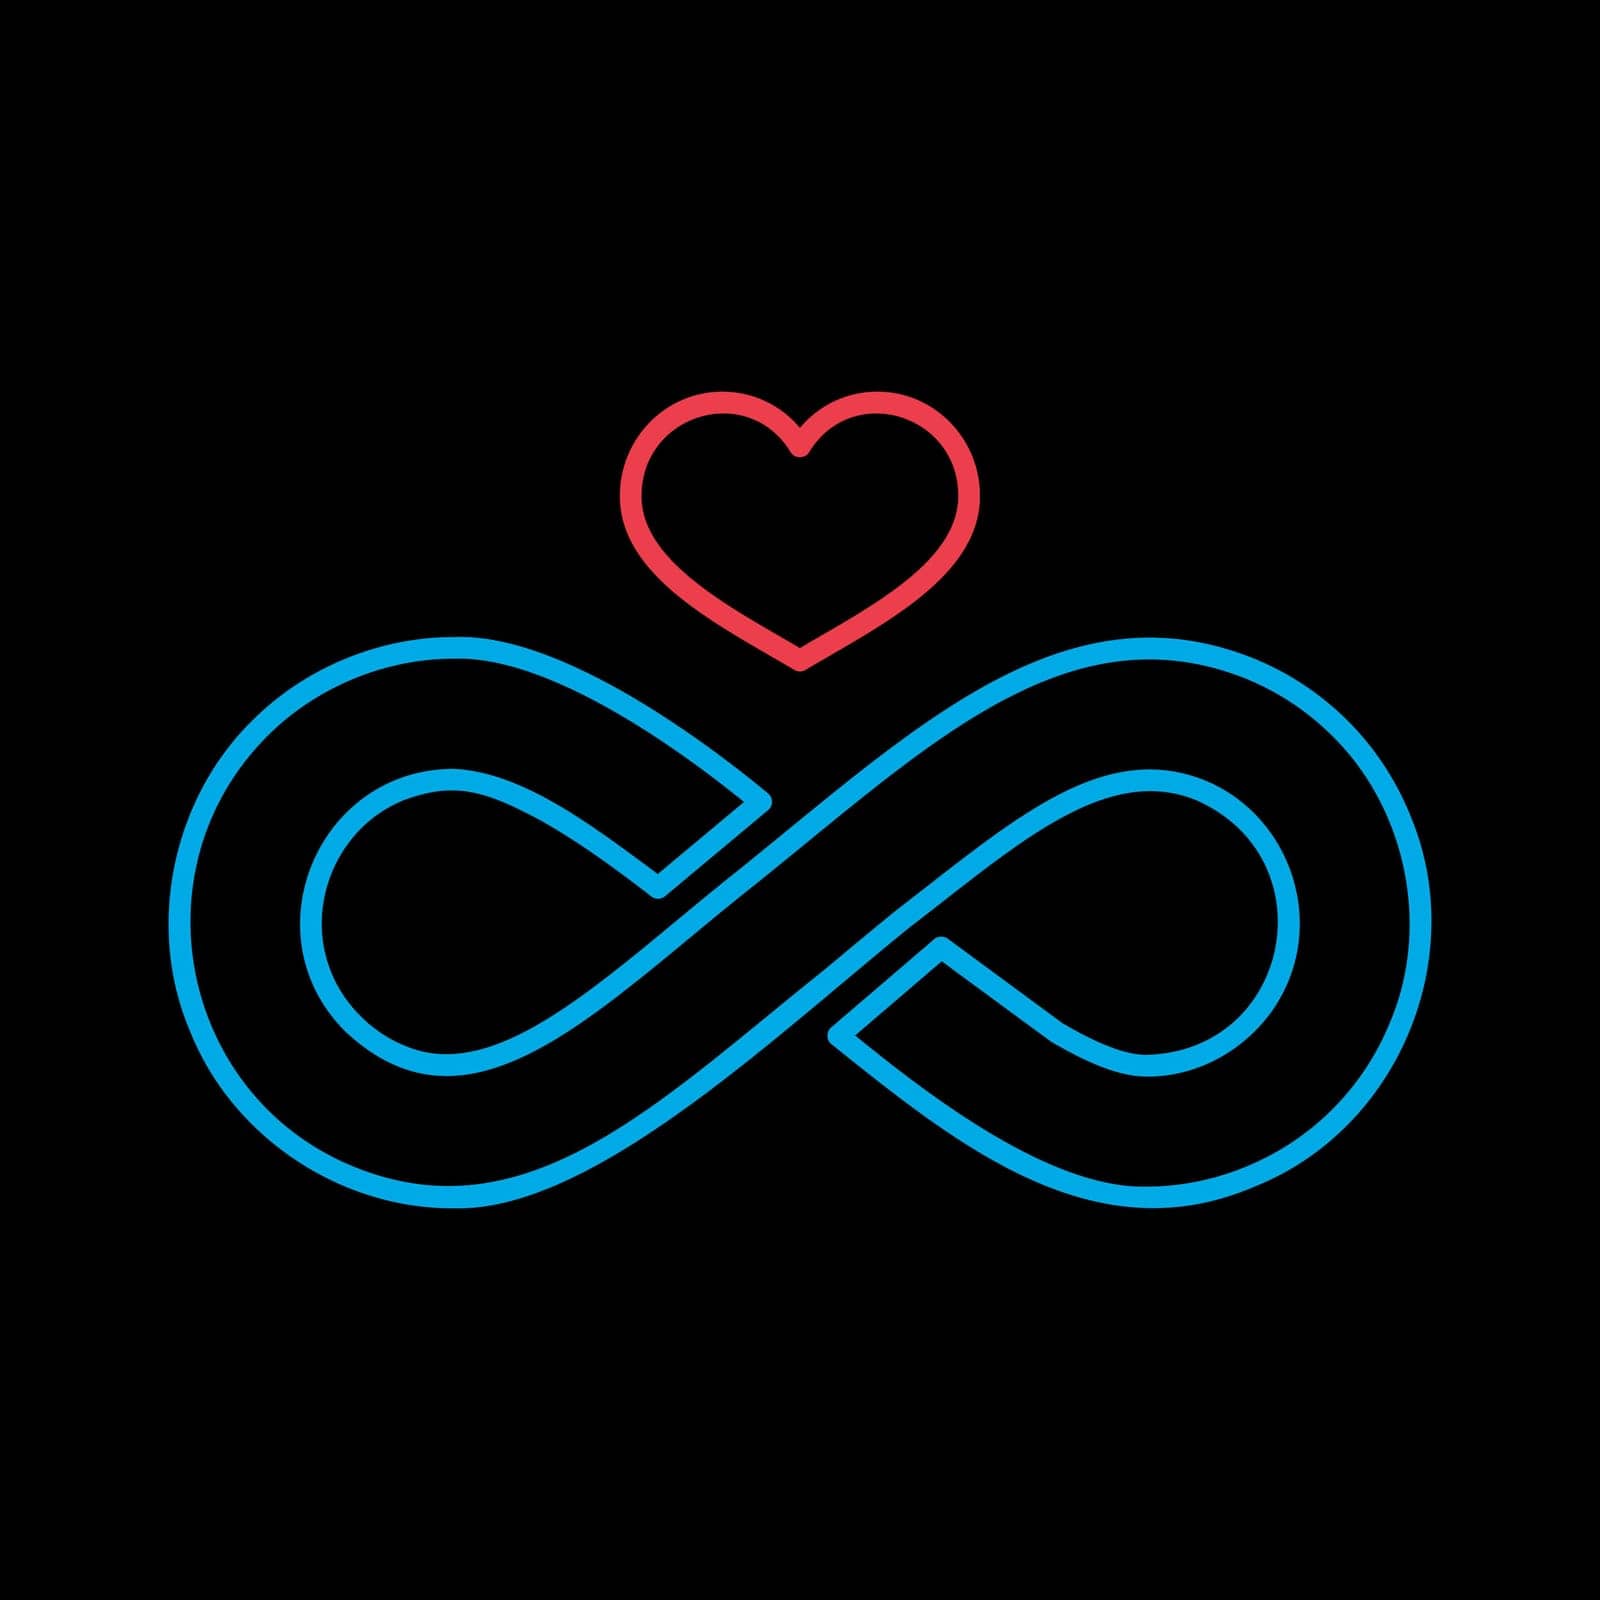 Infinity sign and heart symbol of eternal love by nosik